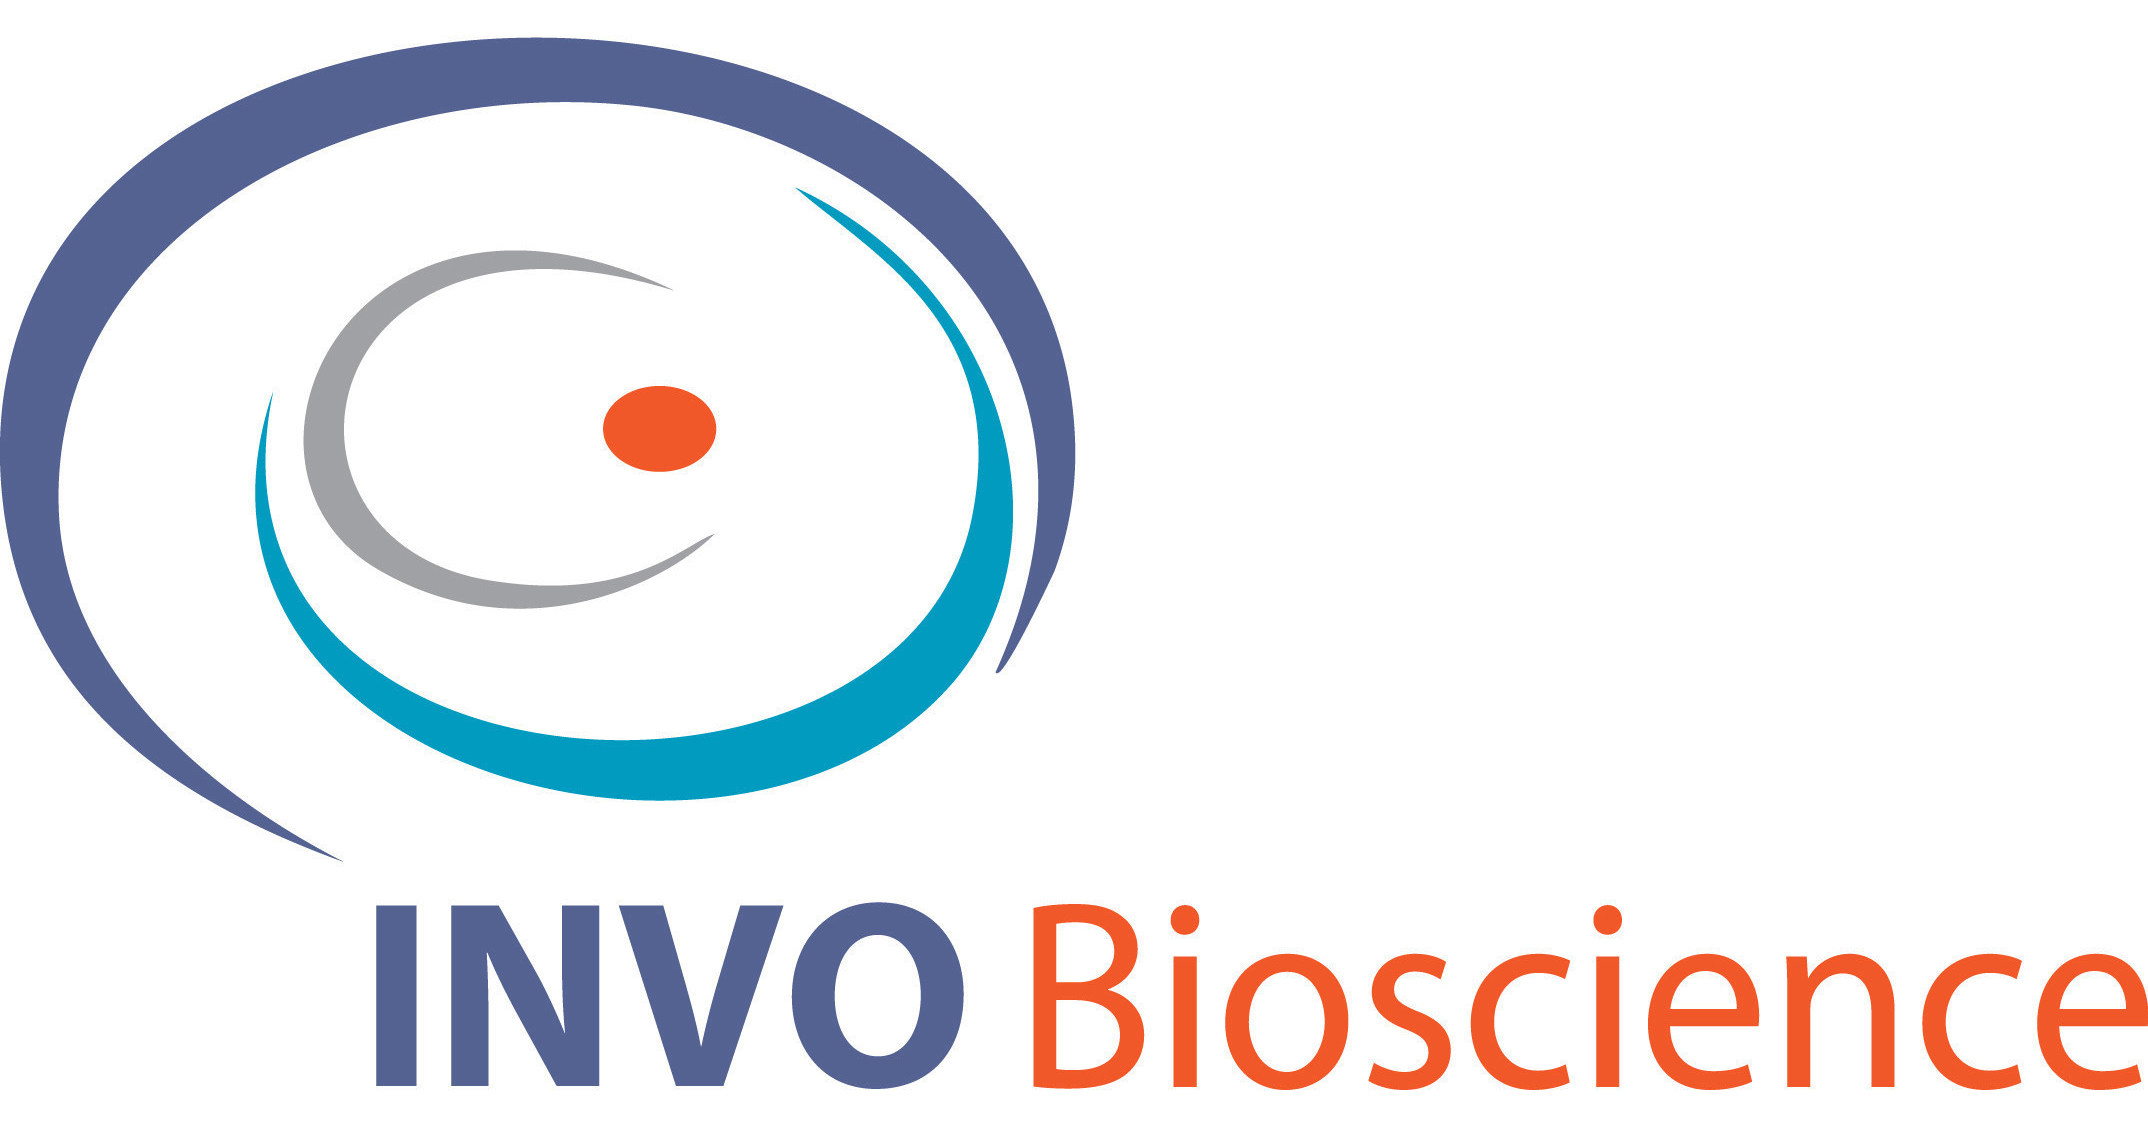 INVO Bioscience (IVOB) is a medical device company, headquartered in Medford, Massachusetts, focused on creating simplified, lower cost treatment options for patients diagnosed with infertility. The company&apos;s lead product, the INVOcell, is a novel medical device used in infertility treatment that enables egg fertilization and early embryo development in the woman&apos;s vaginal cavity. The company was founded by Claude Ranoux, MD, a noted expert in the field of reproductive health, infertility and embryology. (PRNewsFoto/INVO Bioscience, Inc.)